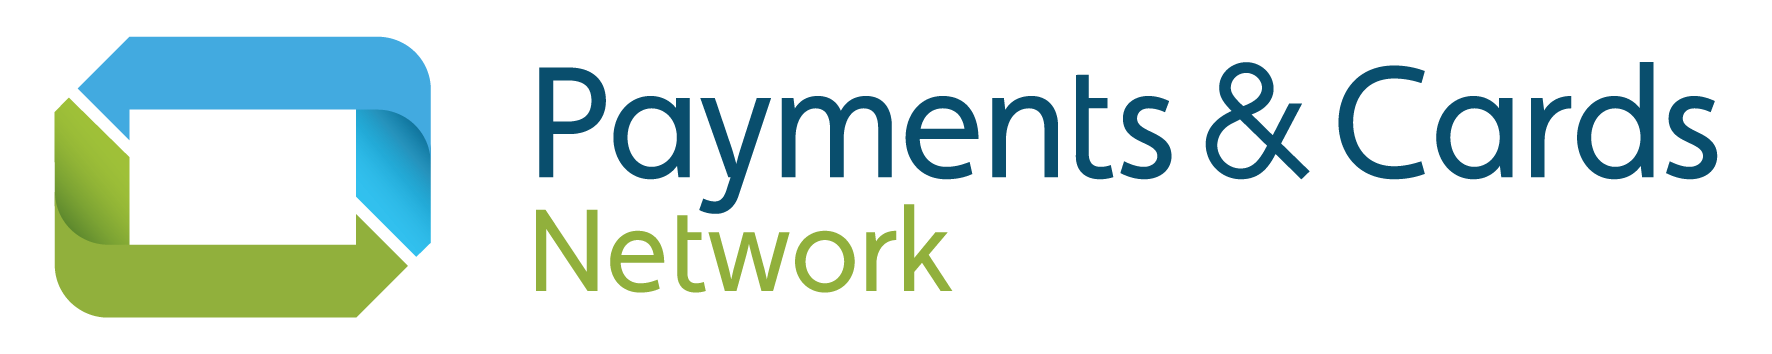 Payments Cards Network